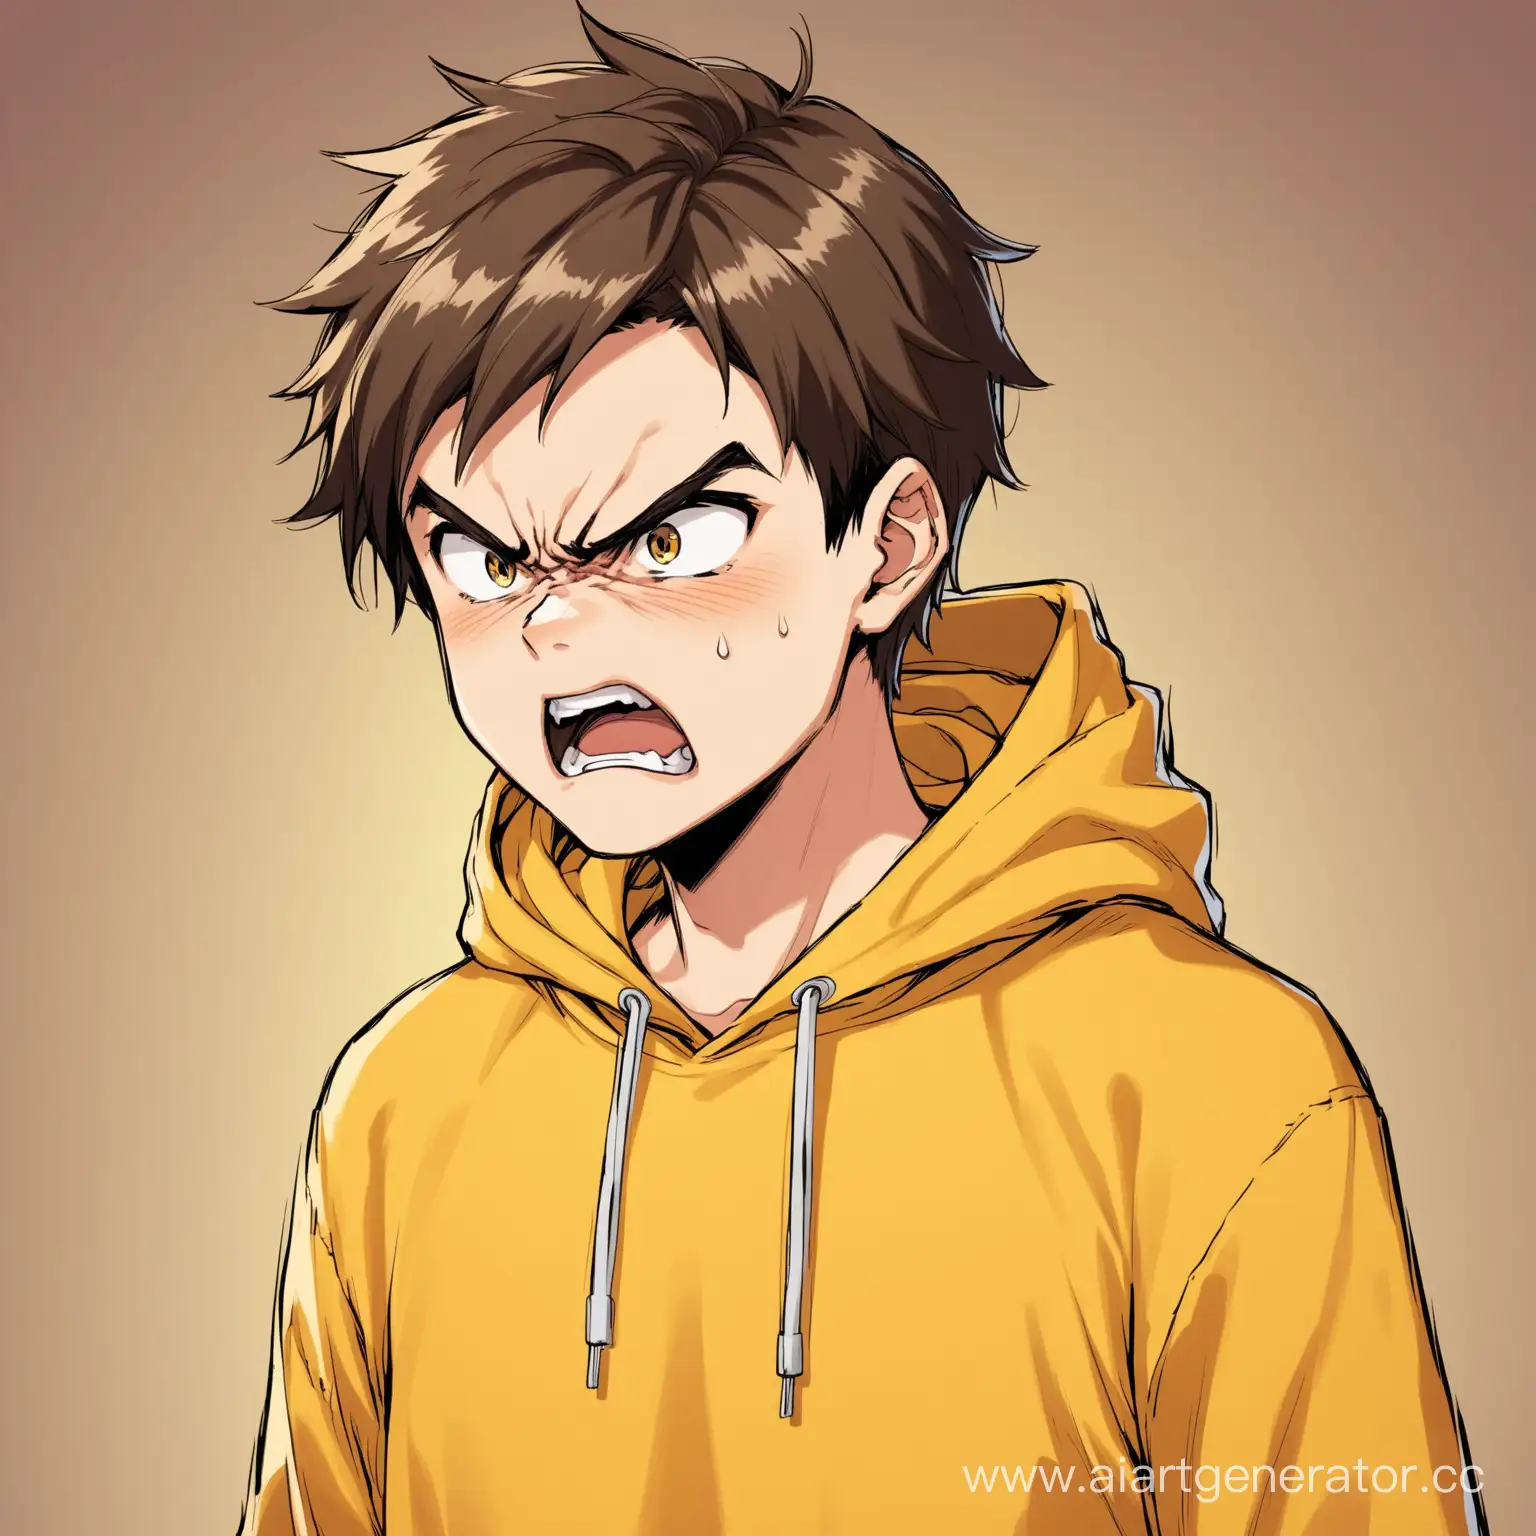 Angry-Teenager-in-Yellow-Hoodie-with-Brown-Hair